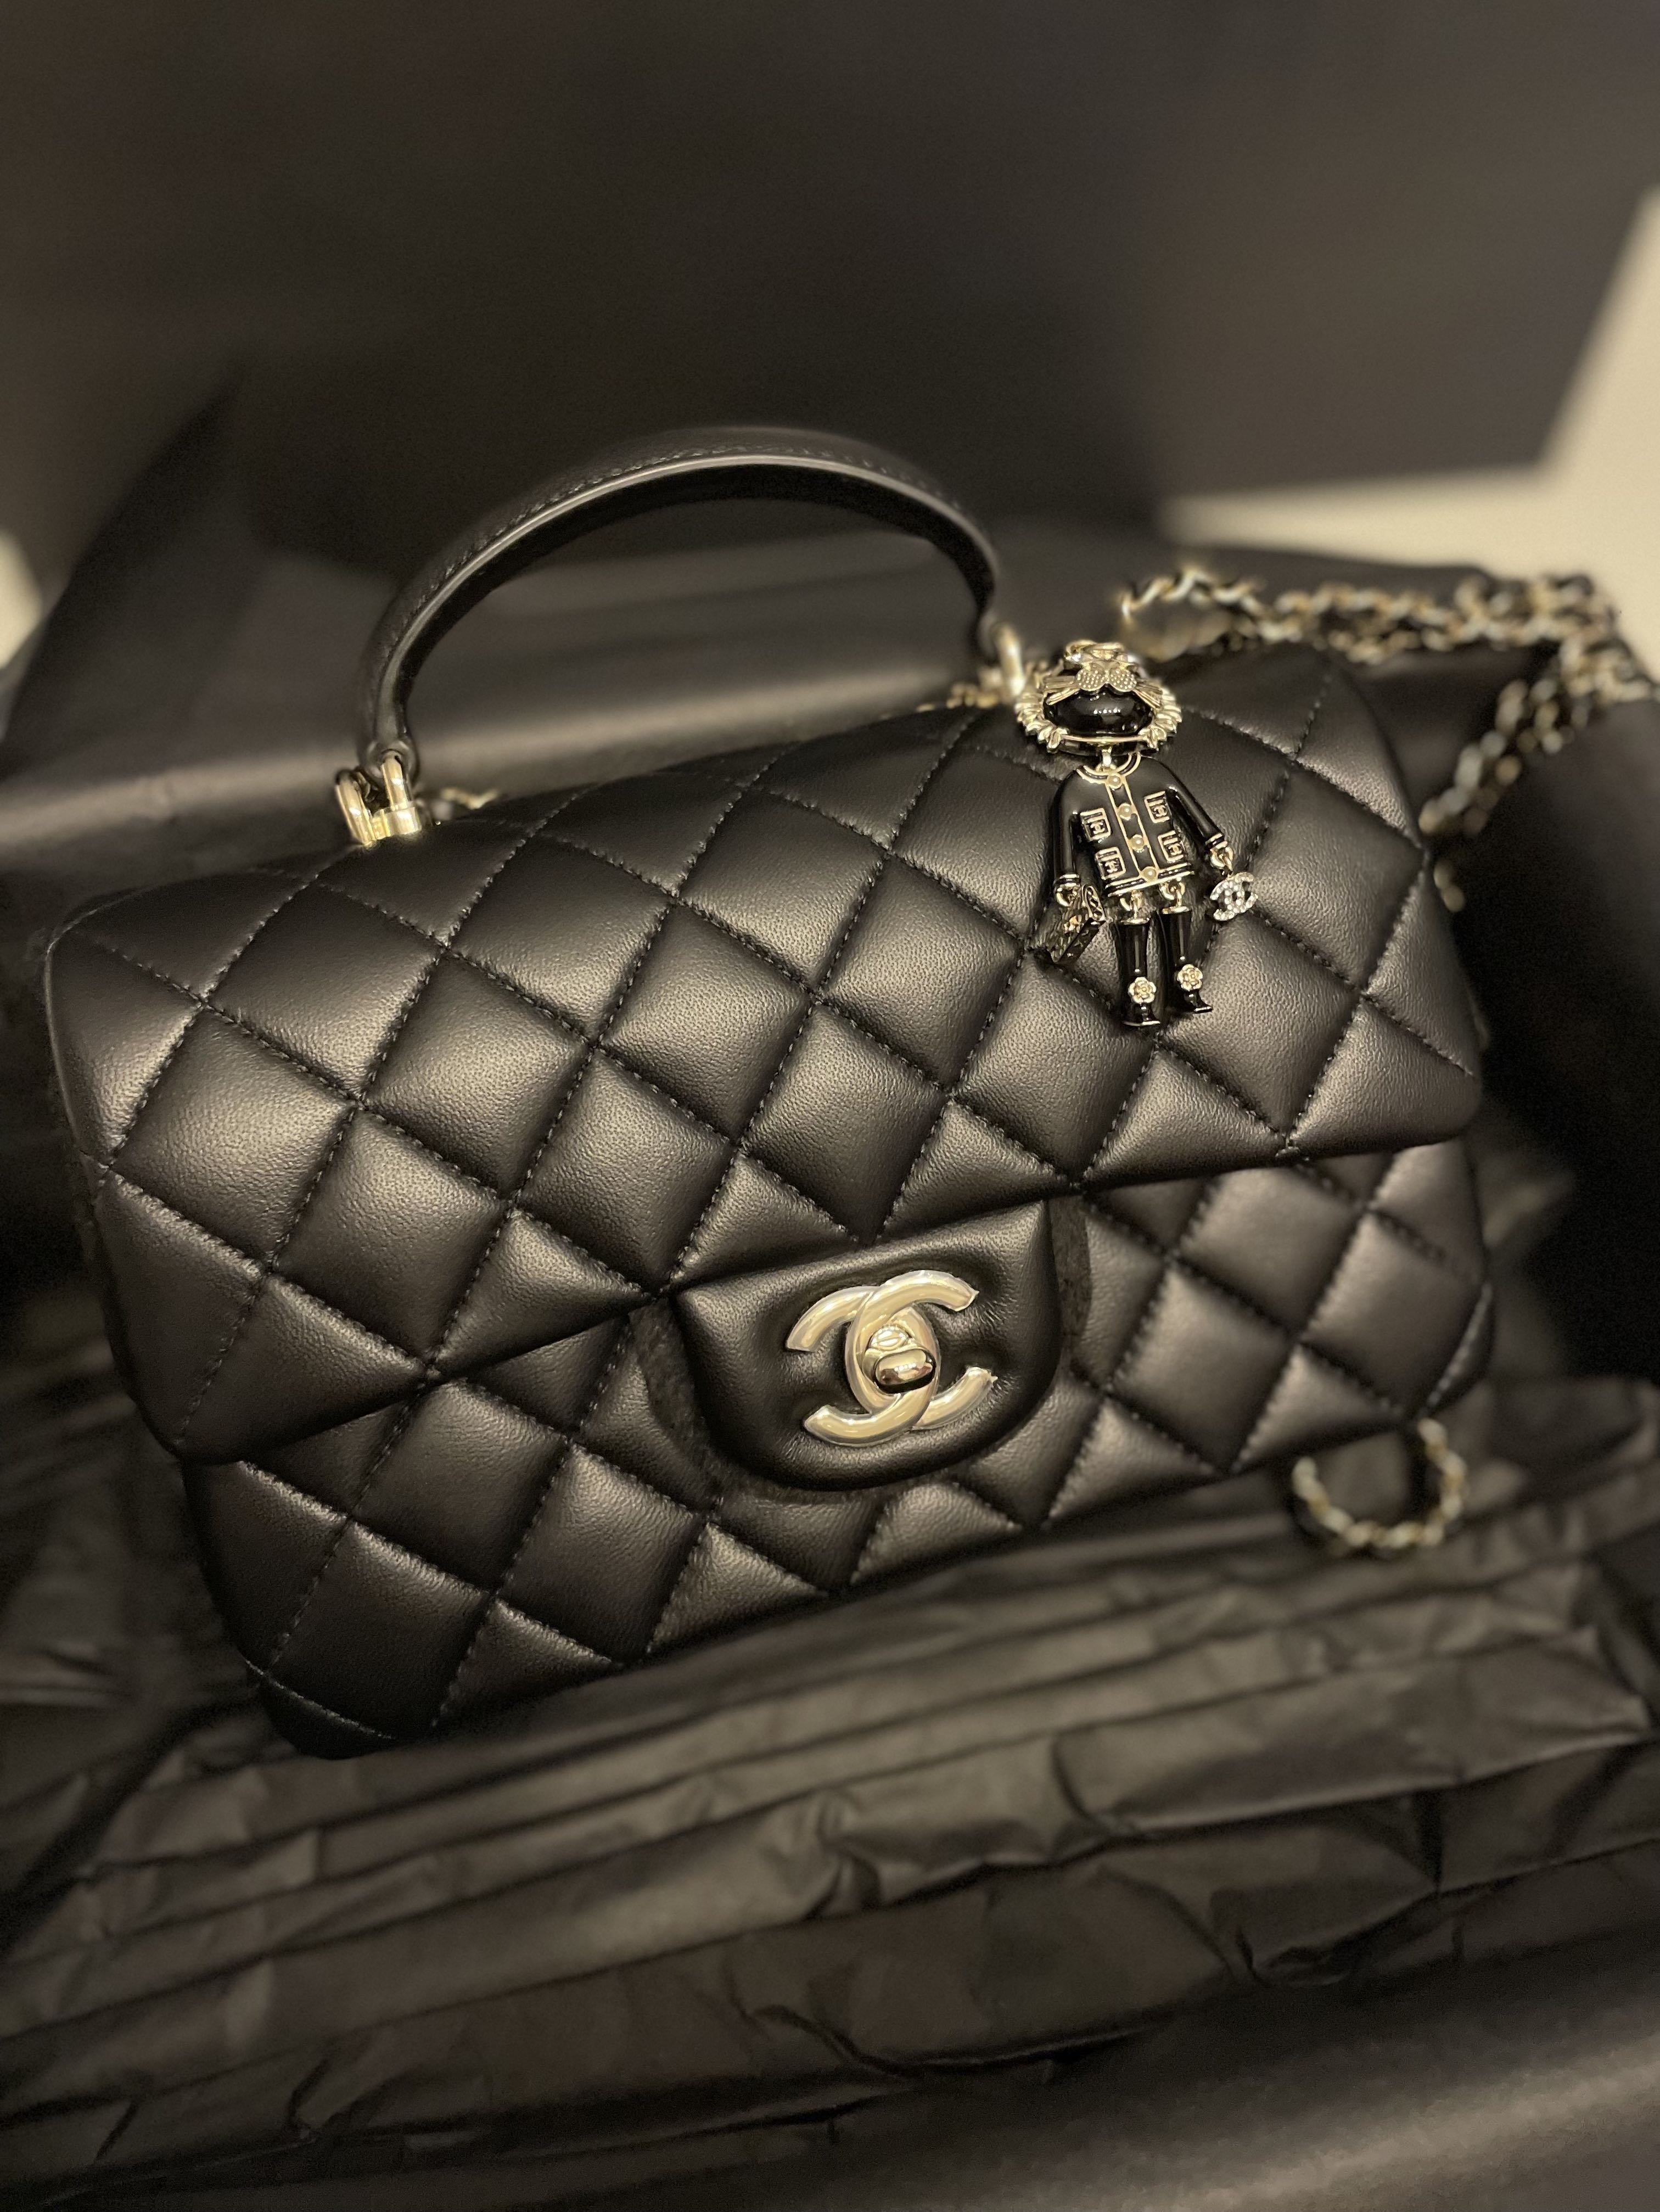 CHANEL Mini flap bag with top handle w coco chanel charm